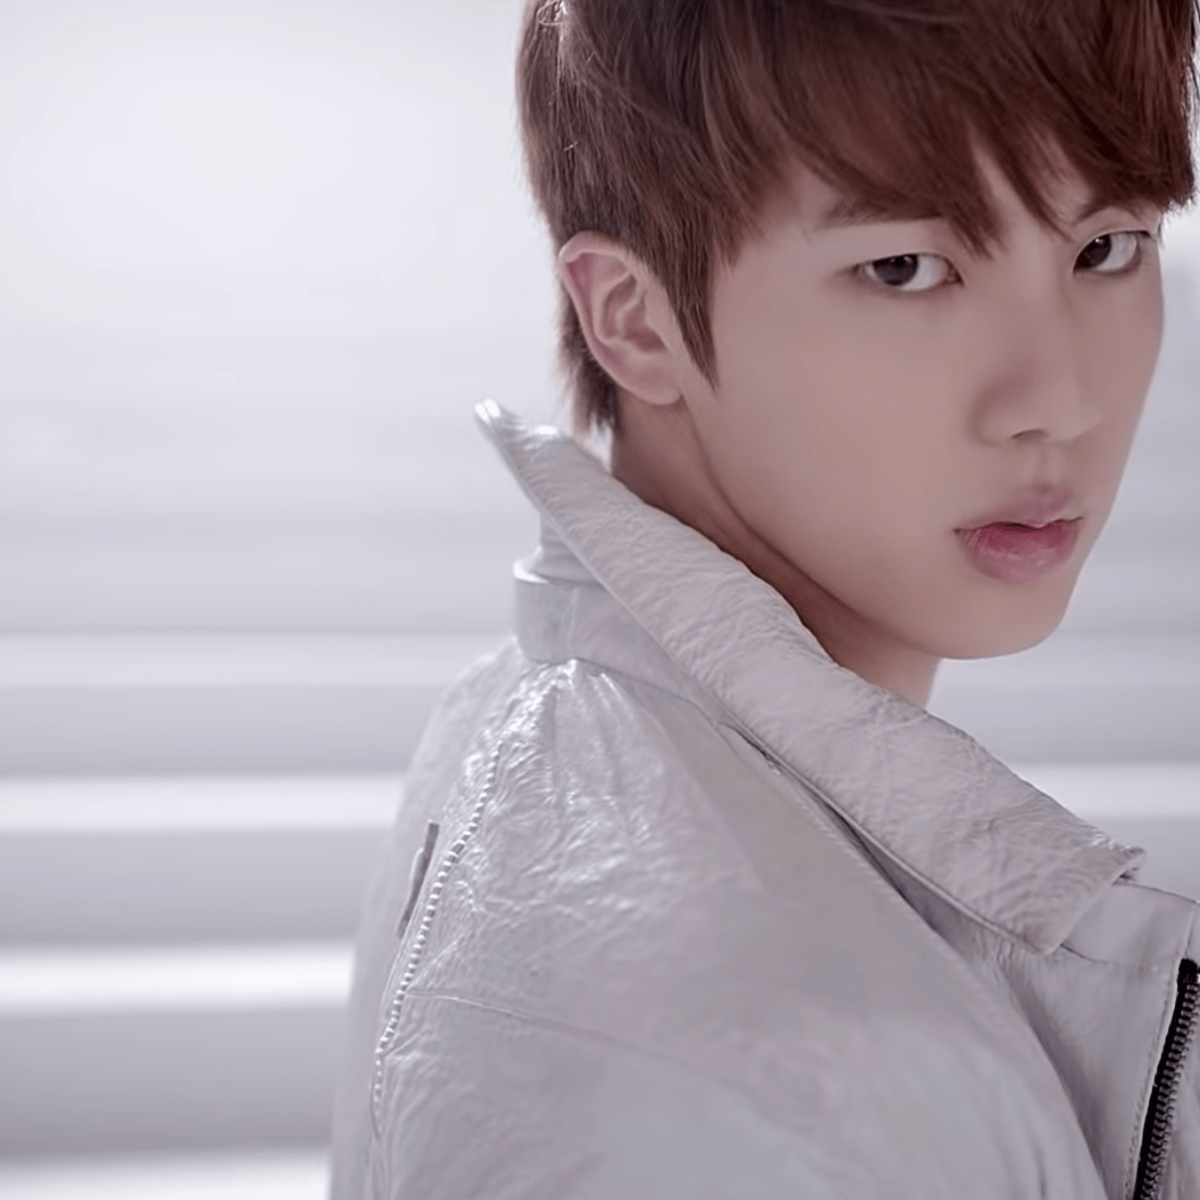 This is BTS' Jin new record in the United States